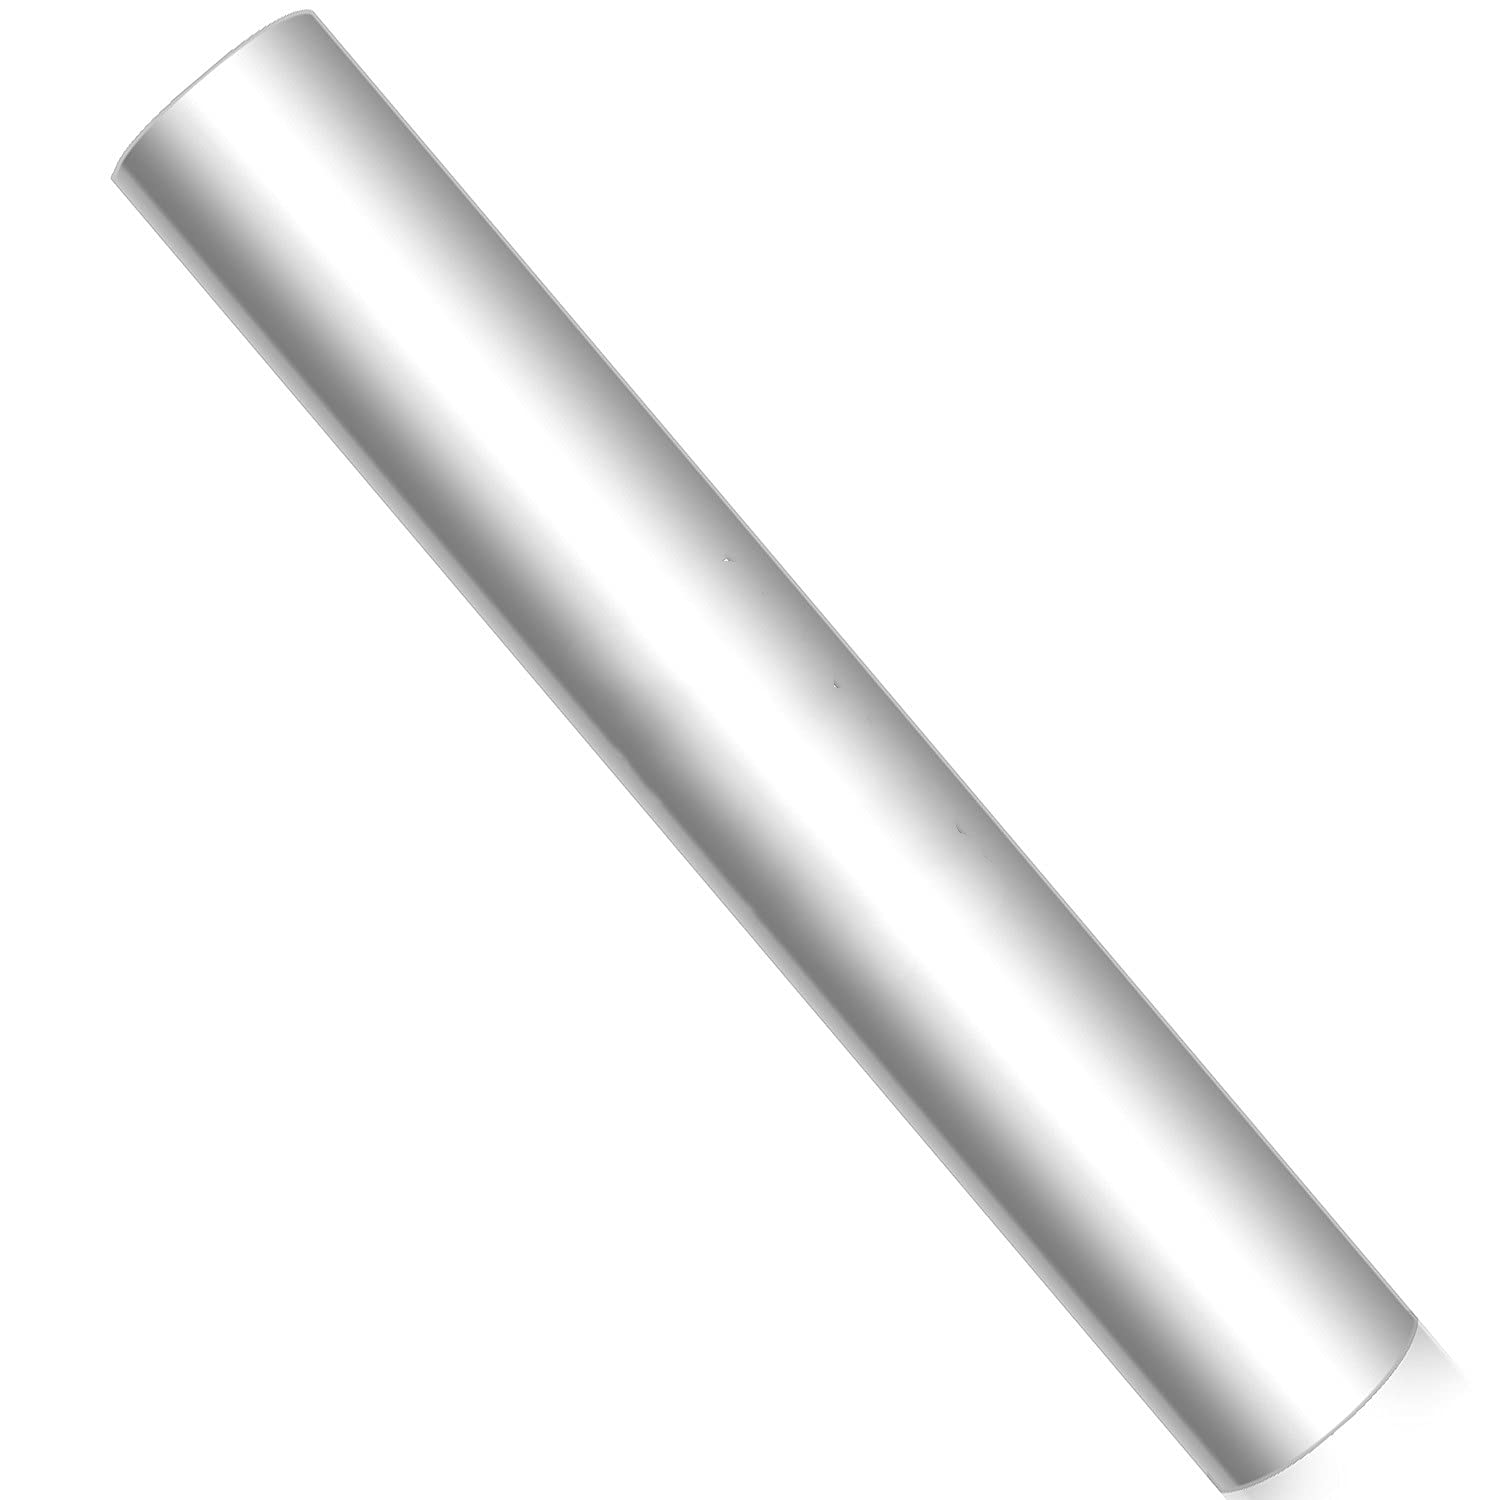 MAOUYWIEE 1 Roll Clear Cellophane Wrap Roll 33'' x 115' Ft, 3 Mil Thick Clear Cellophane Wrapping Paper | Wrap Roll | Cellophane Roll | Cellophane Wrap for Gifts, Baskets, Flowers